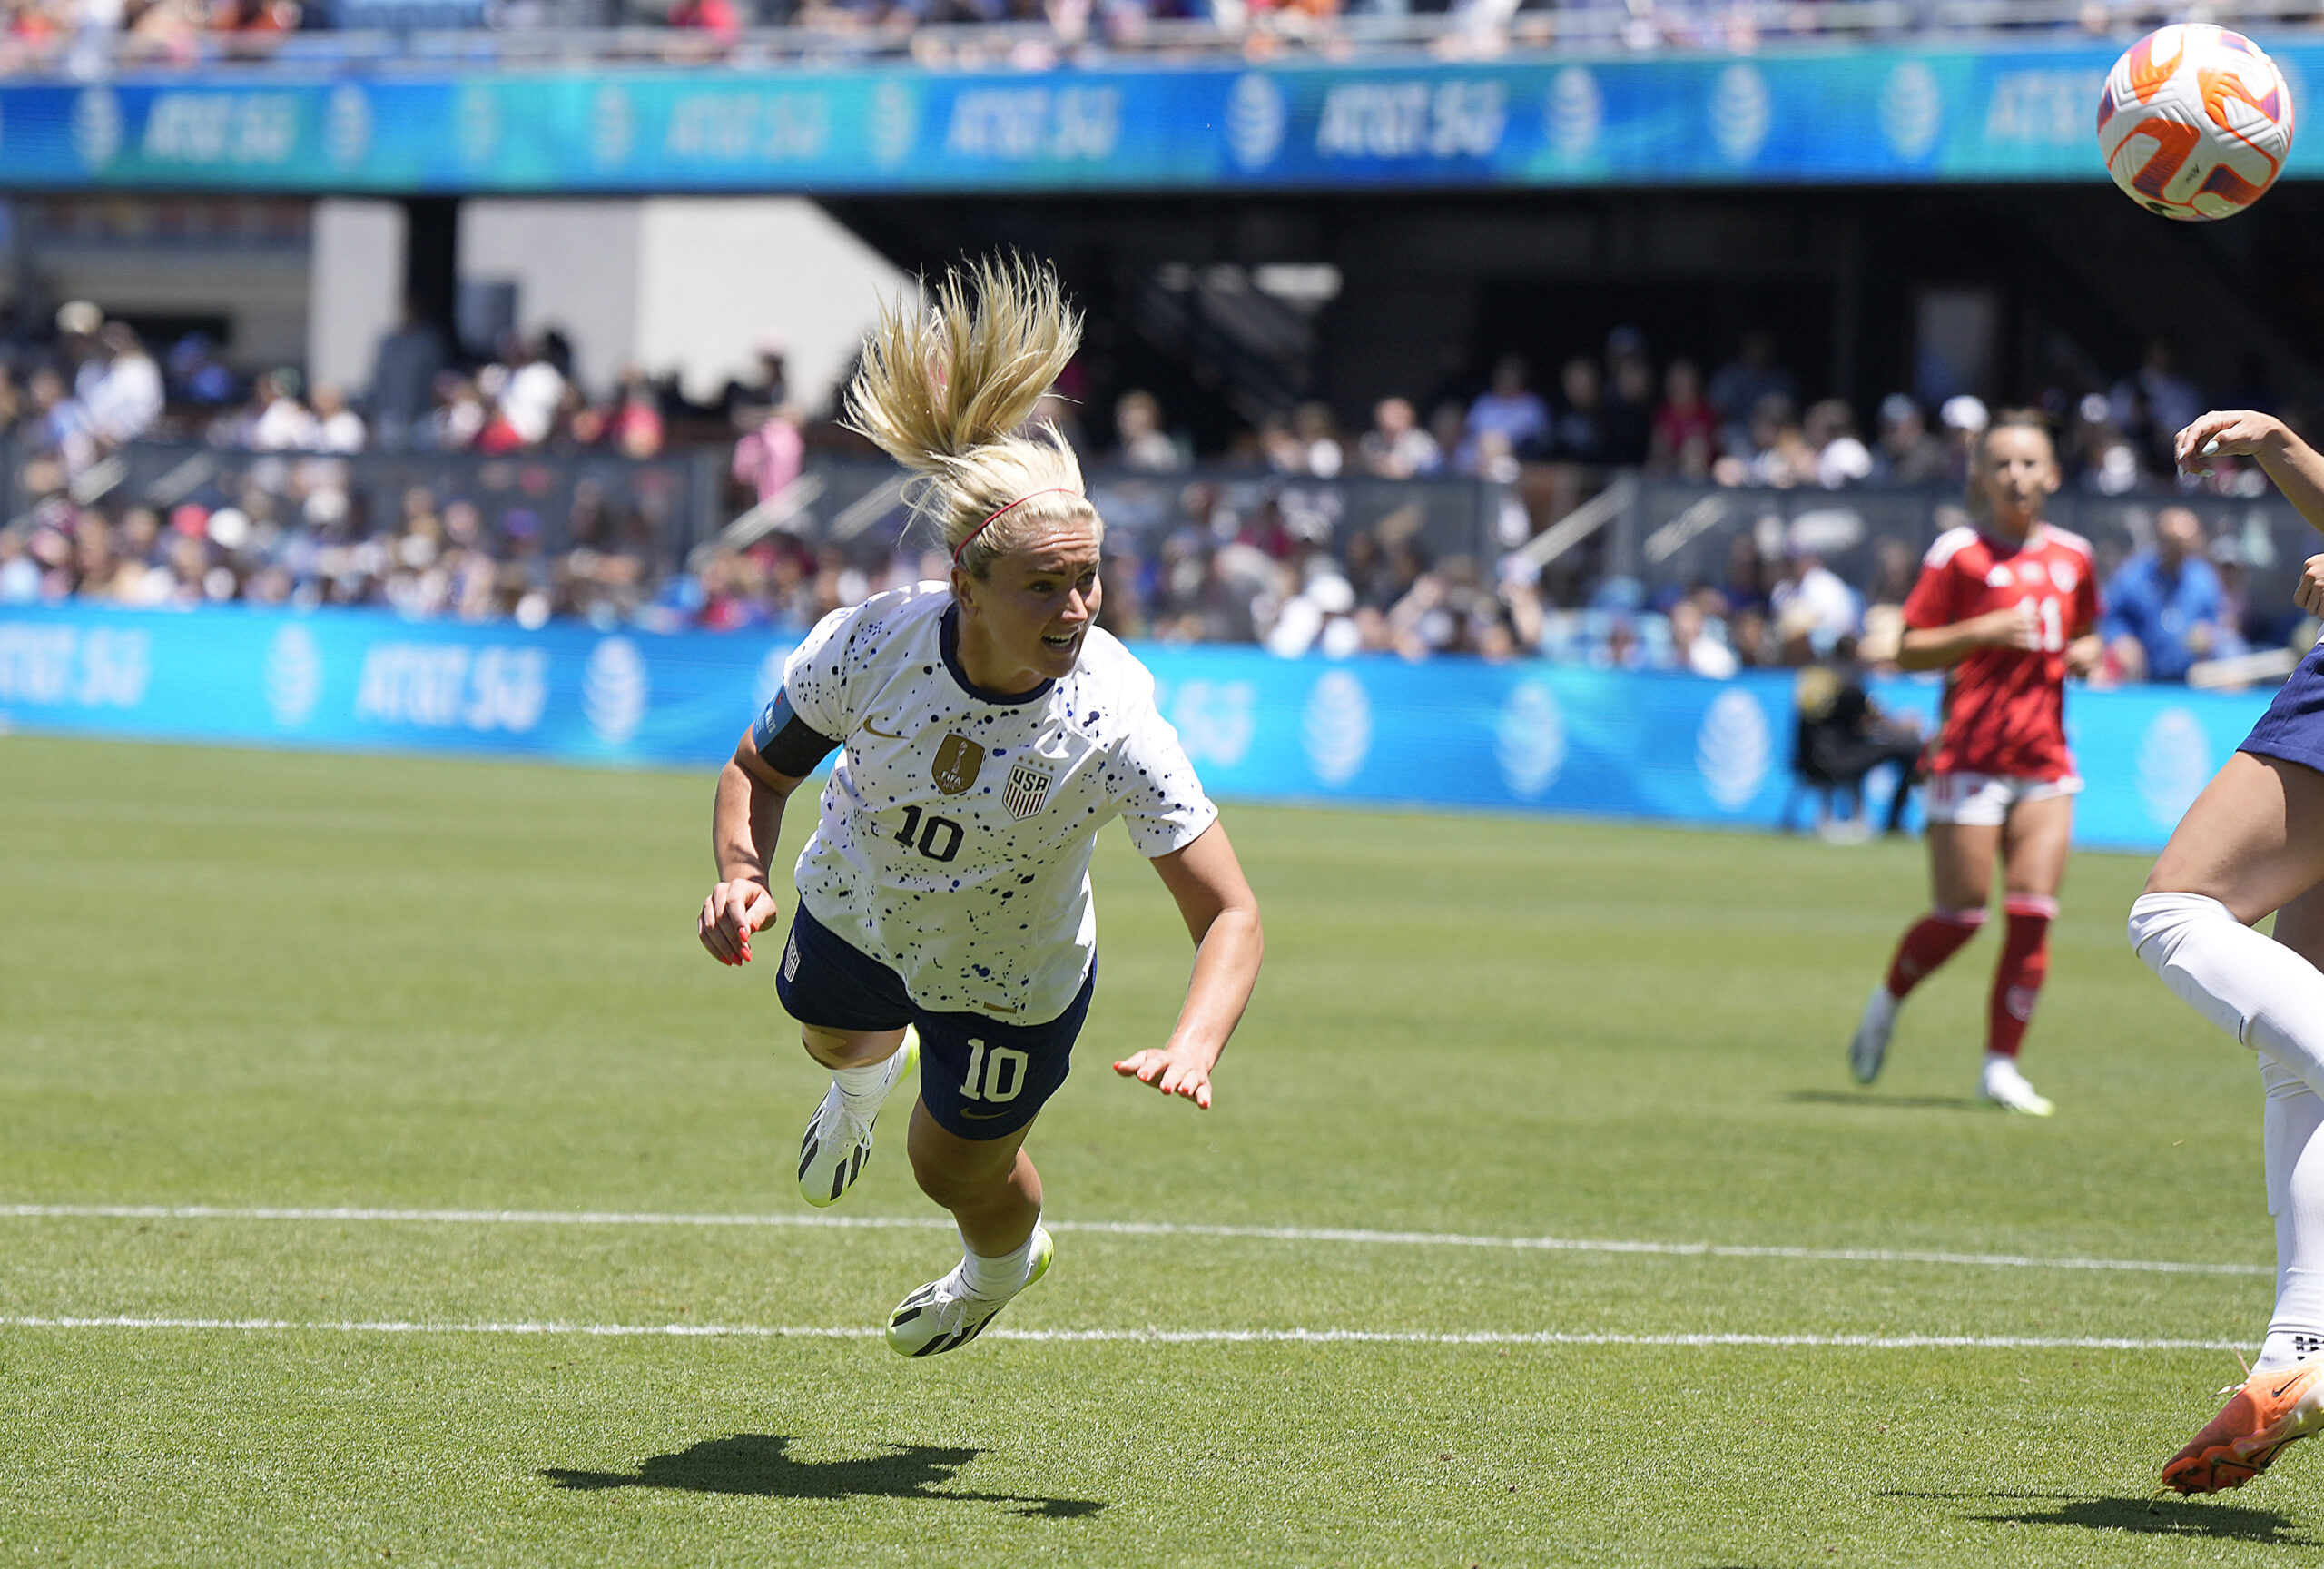 United States Women’s Soccer: Lindsey Horan and Julie Ertz’s Farewell Game Against South Africa